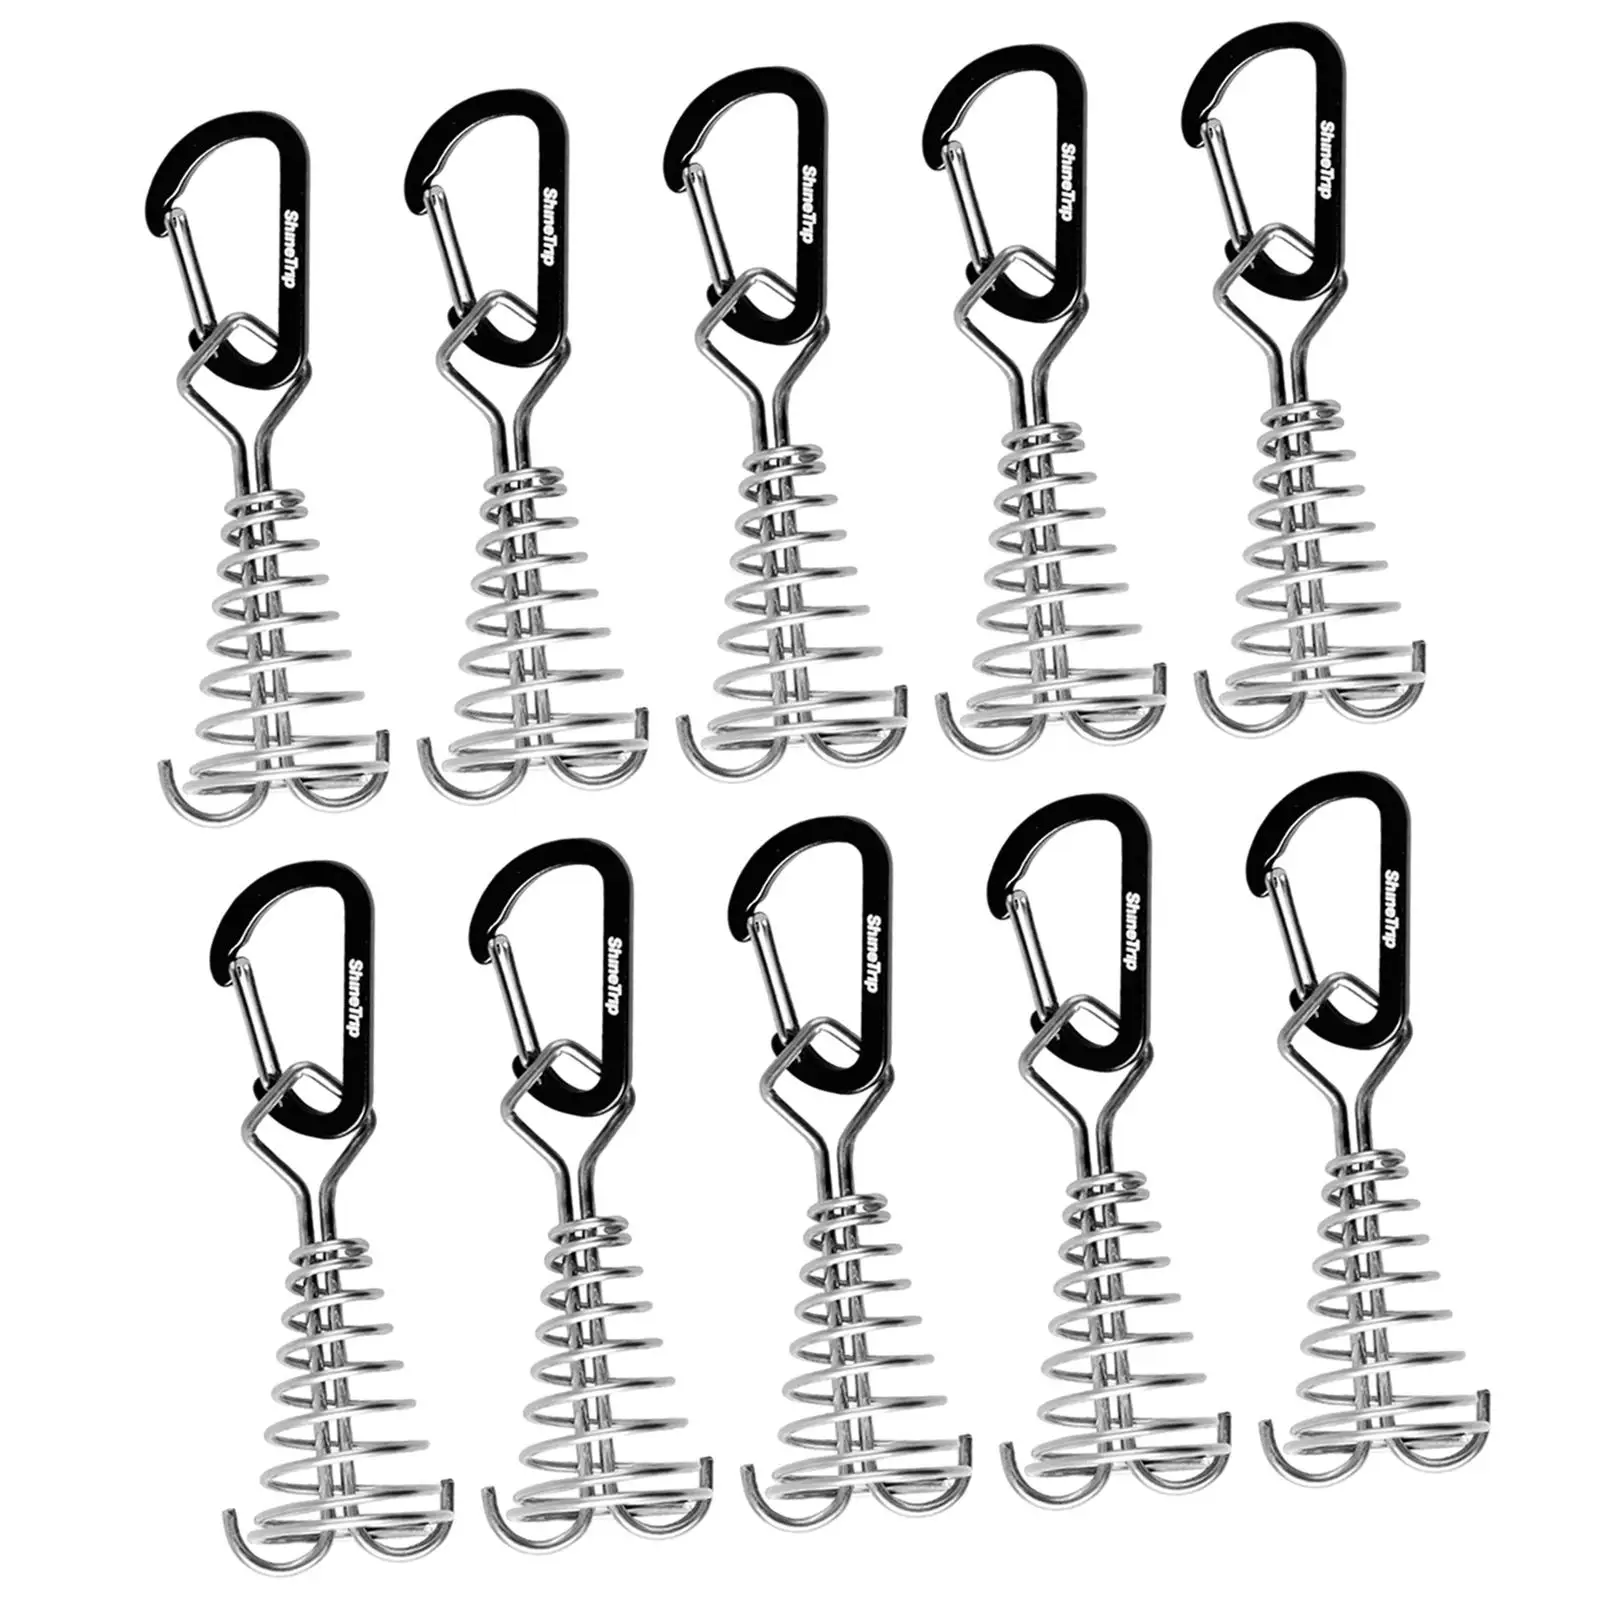 10 Pieces Deck Anchor Pegs with Carabiners Cord Adjuster Tensioner Awning Anchor, Deck Tie Down Tent Stakes for Wood Platform